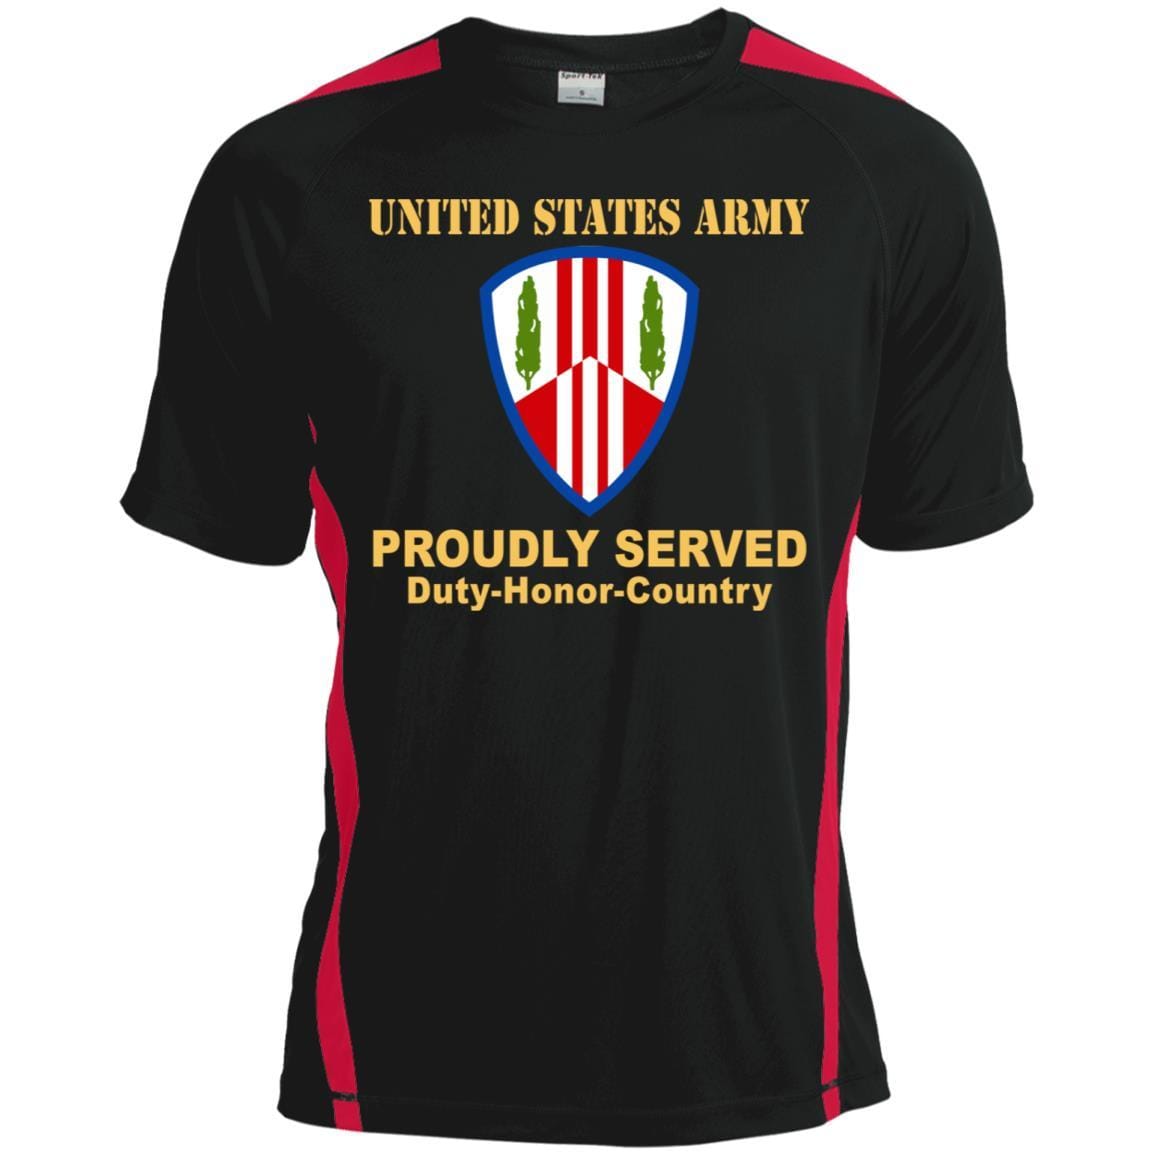 US ARMY 369TH SUSTAINMENT BRIGADE - Proudly Served T-Shirt On Front For Men-TShirt-Army-Veterans Nation